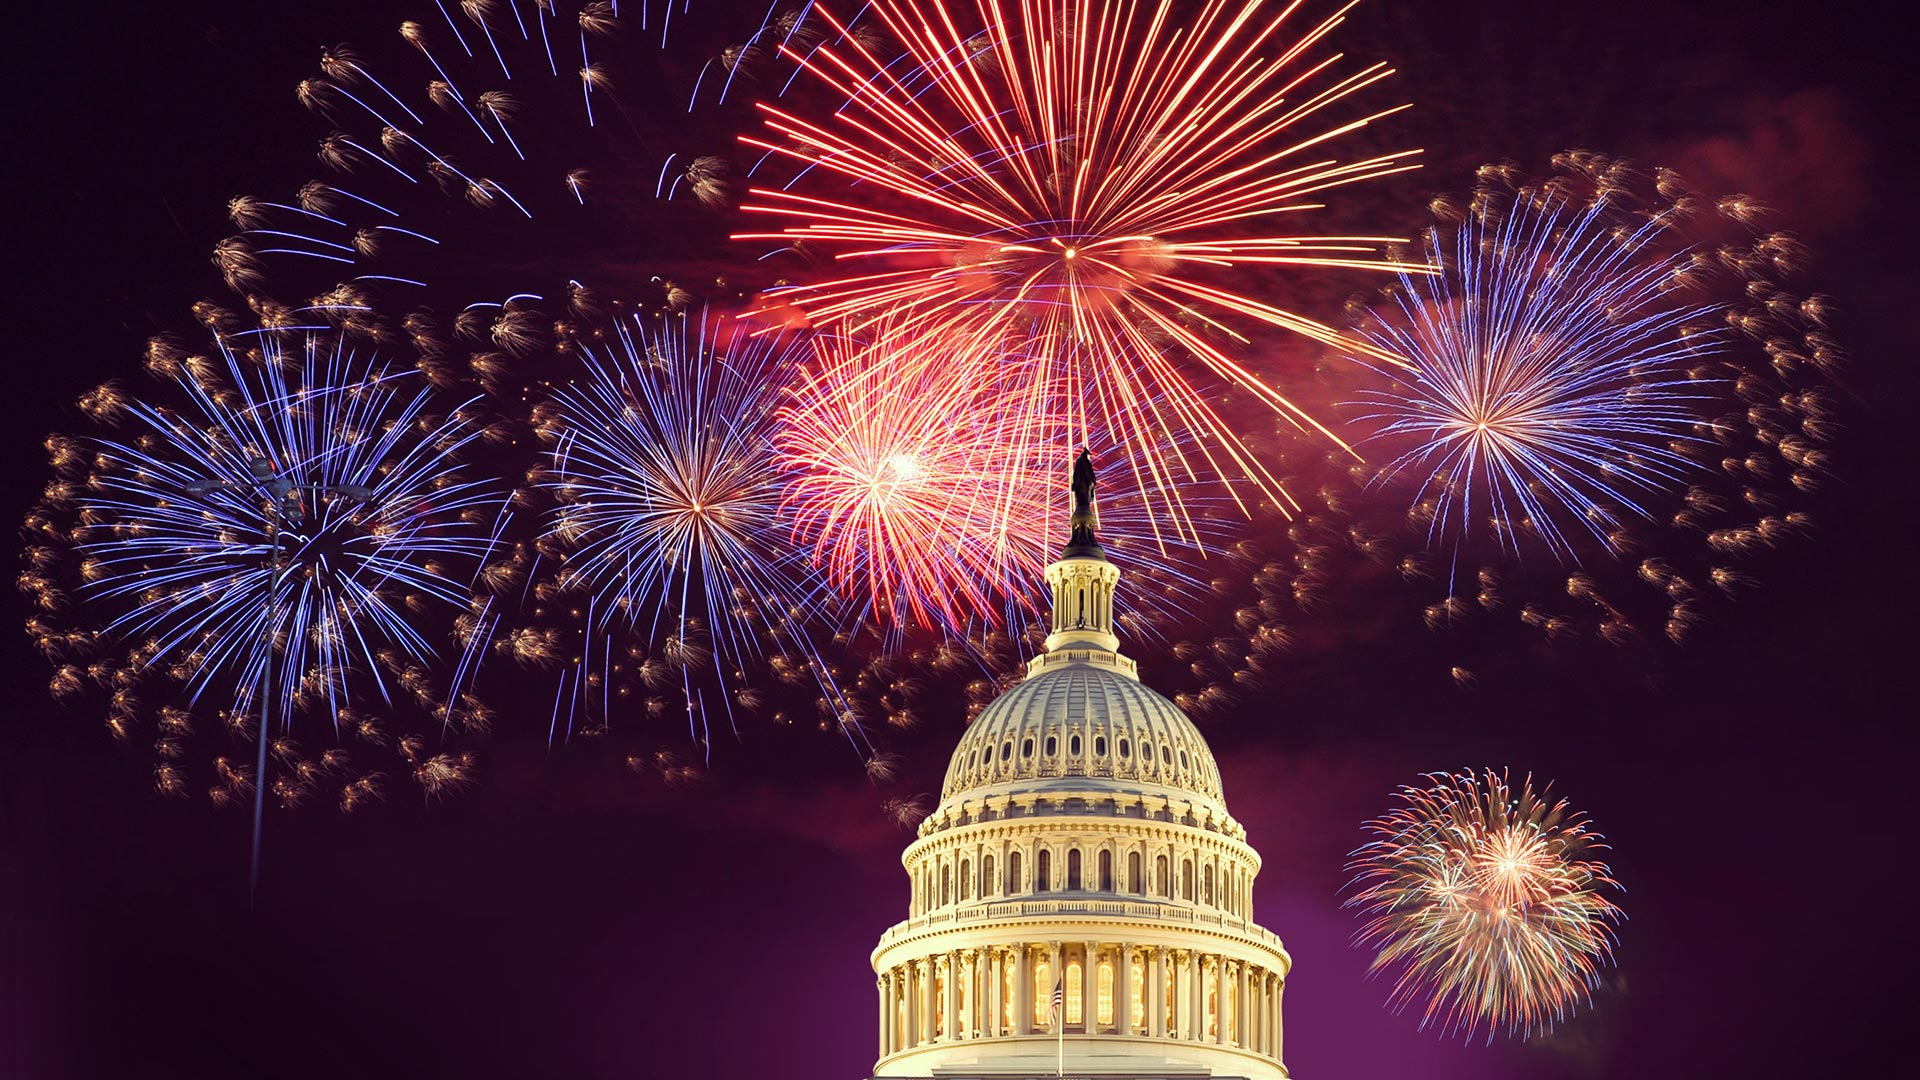 Fireworks over the Capitol Building.